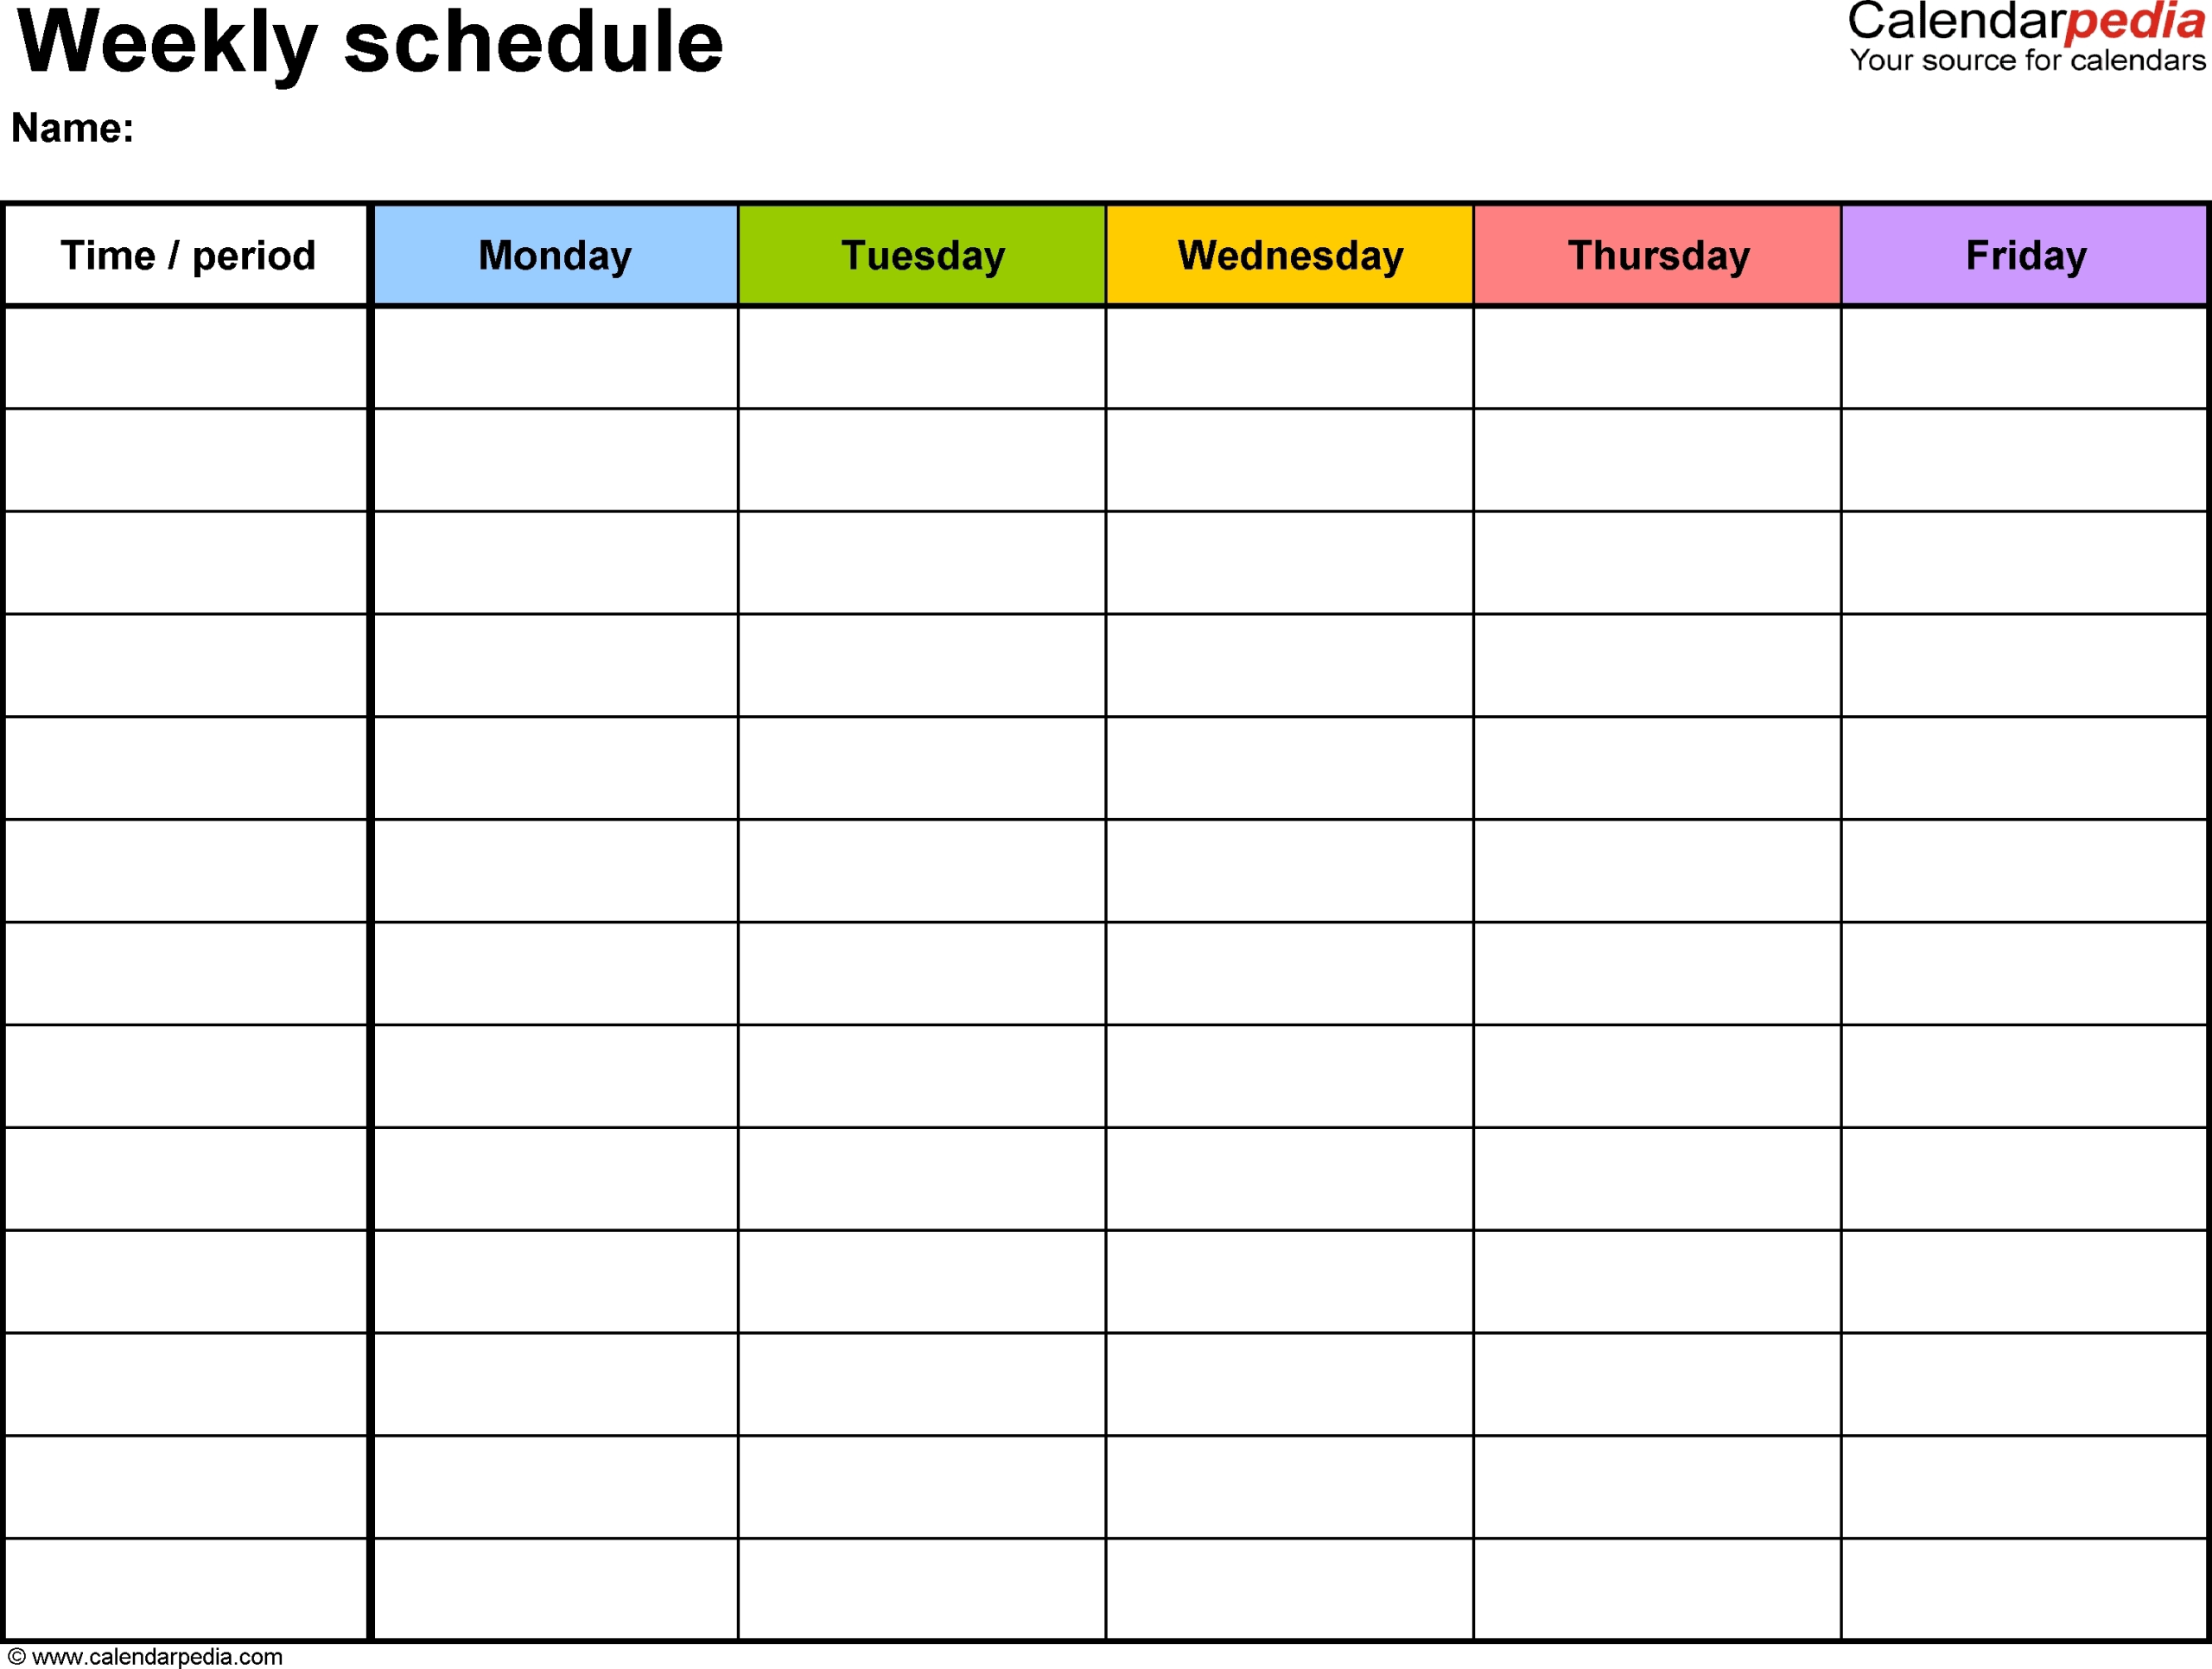 Monthly Work Schedule Template Printable | Calendar Template Printable throughout Blank Monthly Work Schedule Template